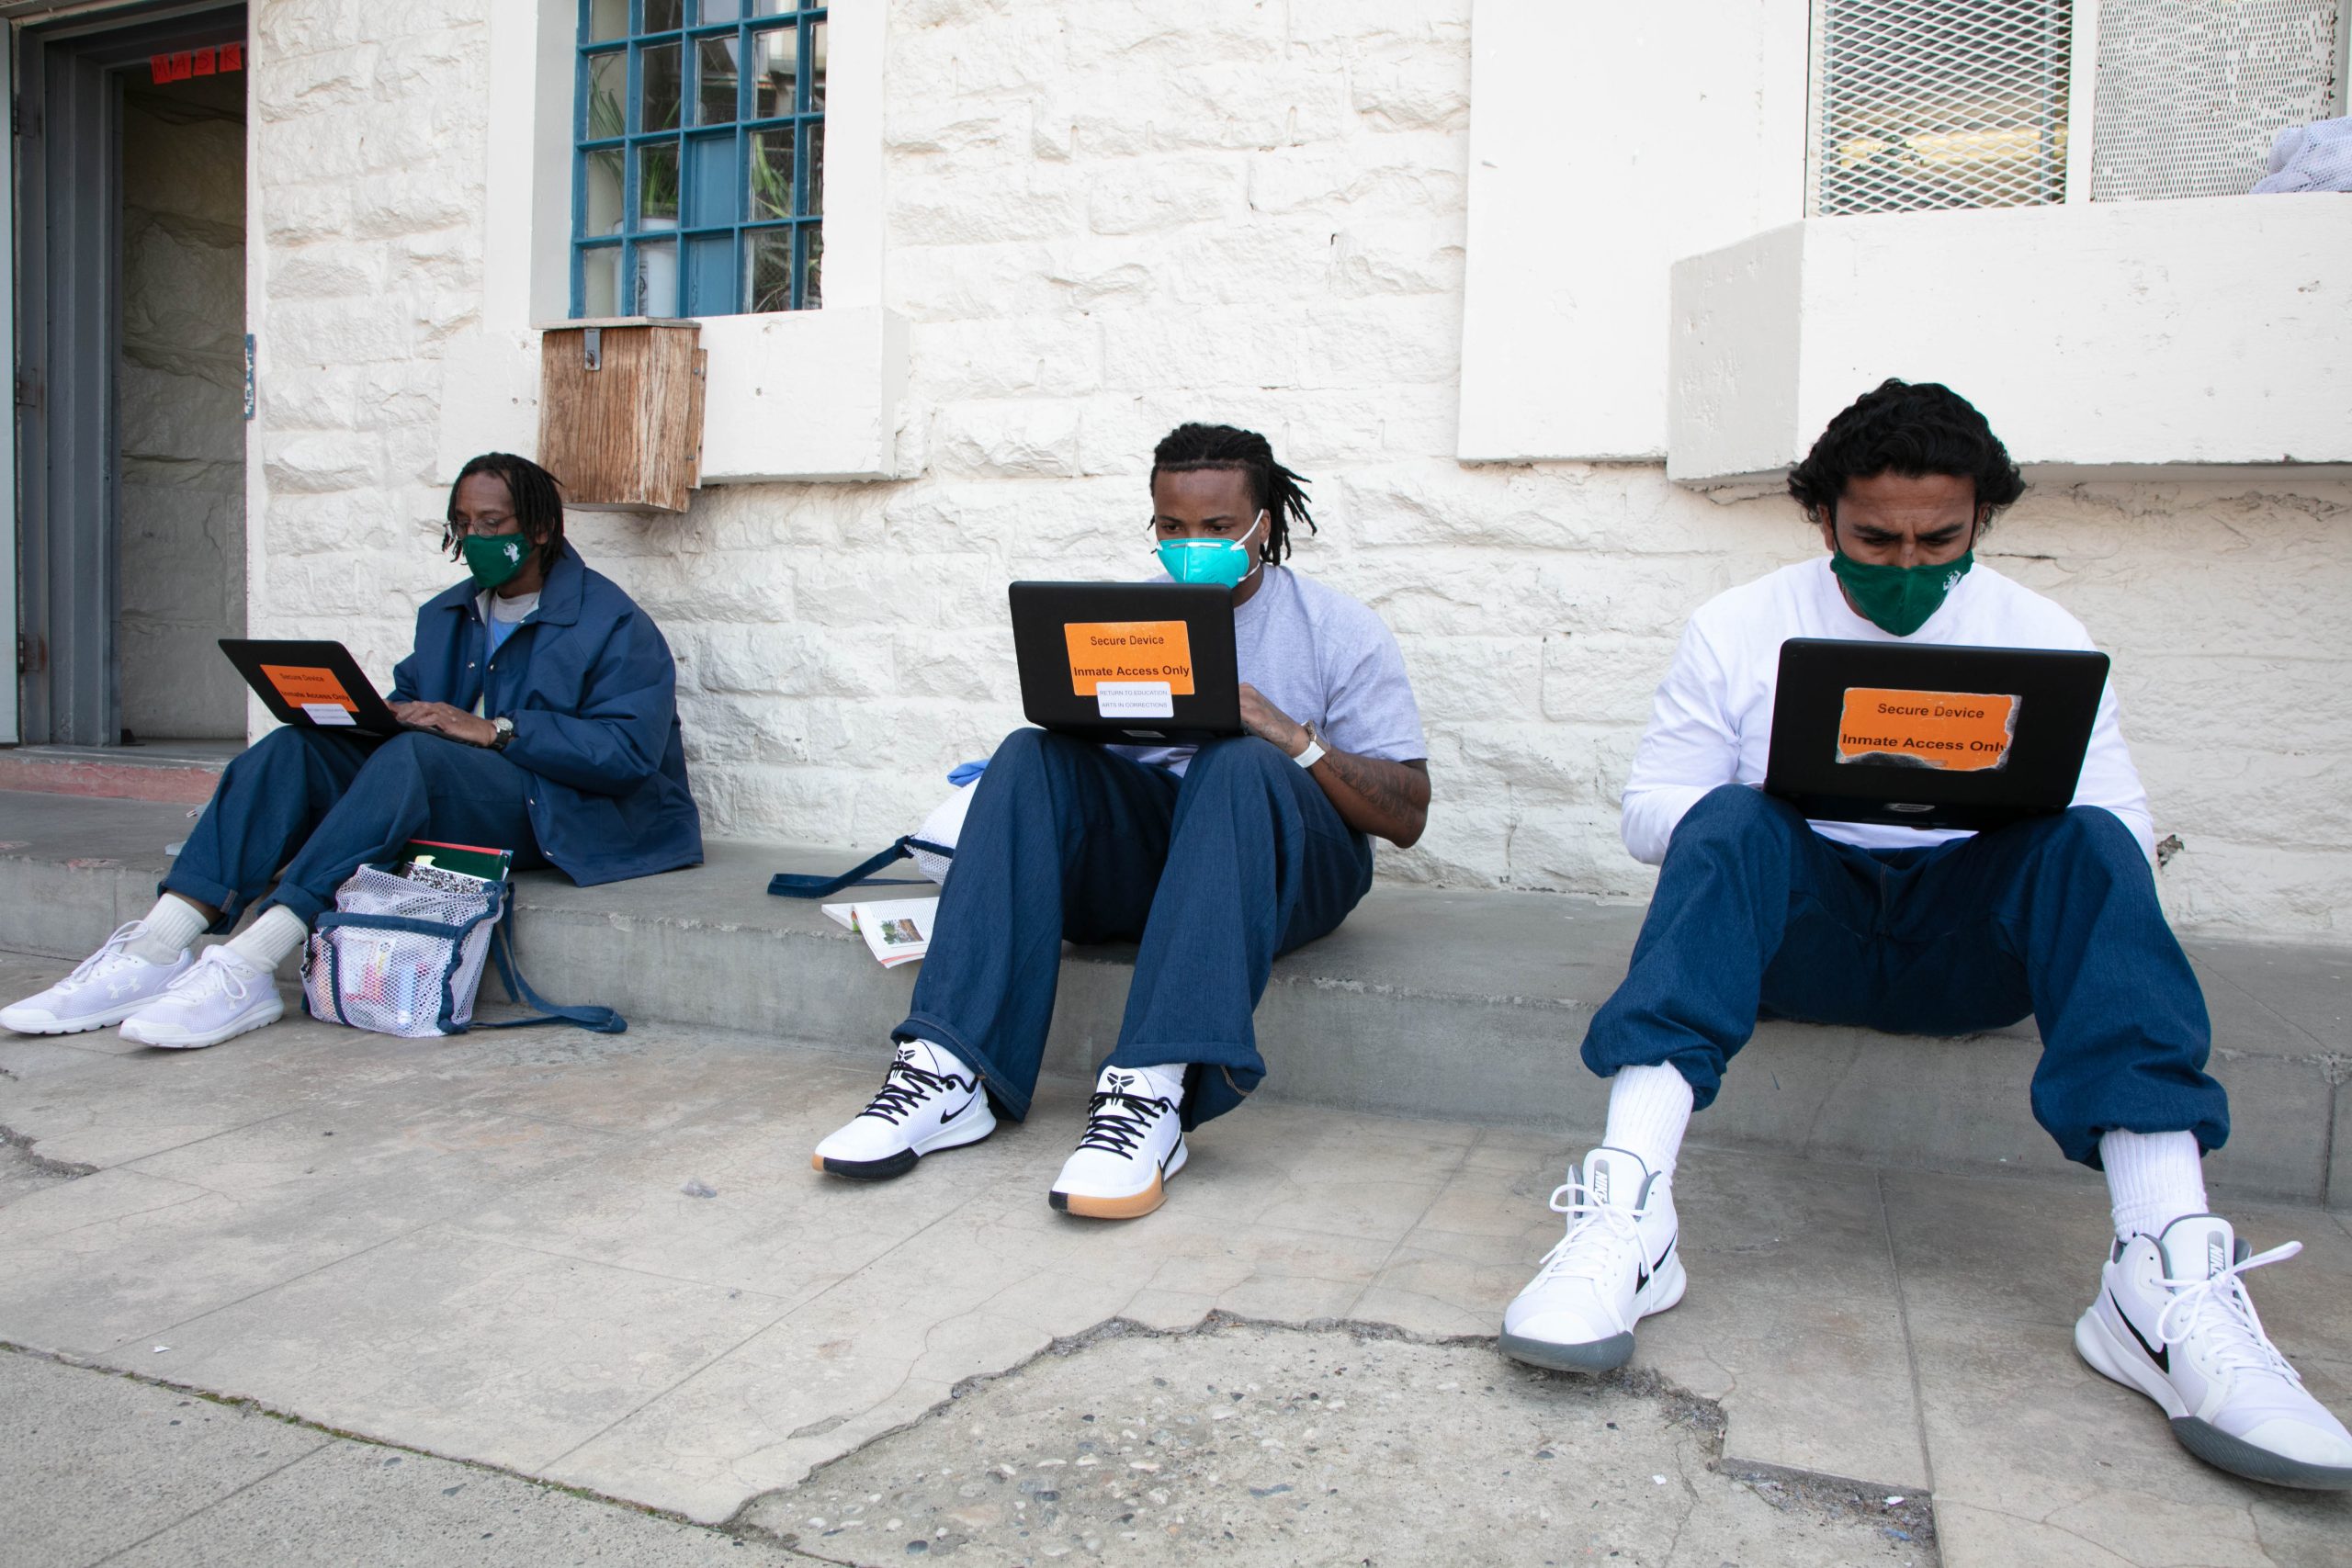 Three incarcerated men sit against a brick wall and use laptops.